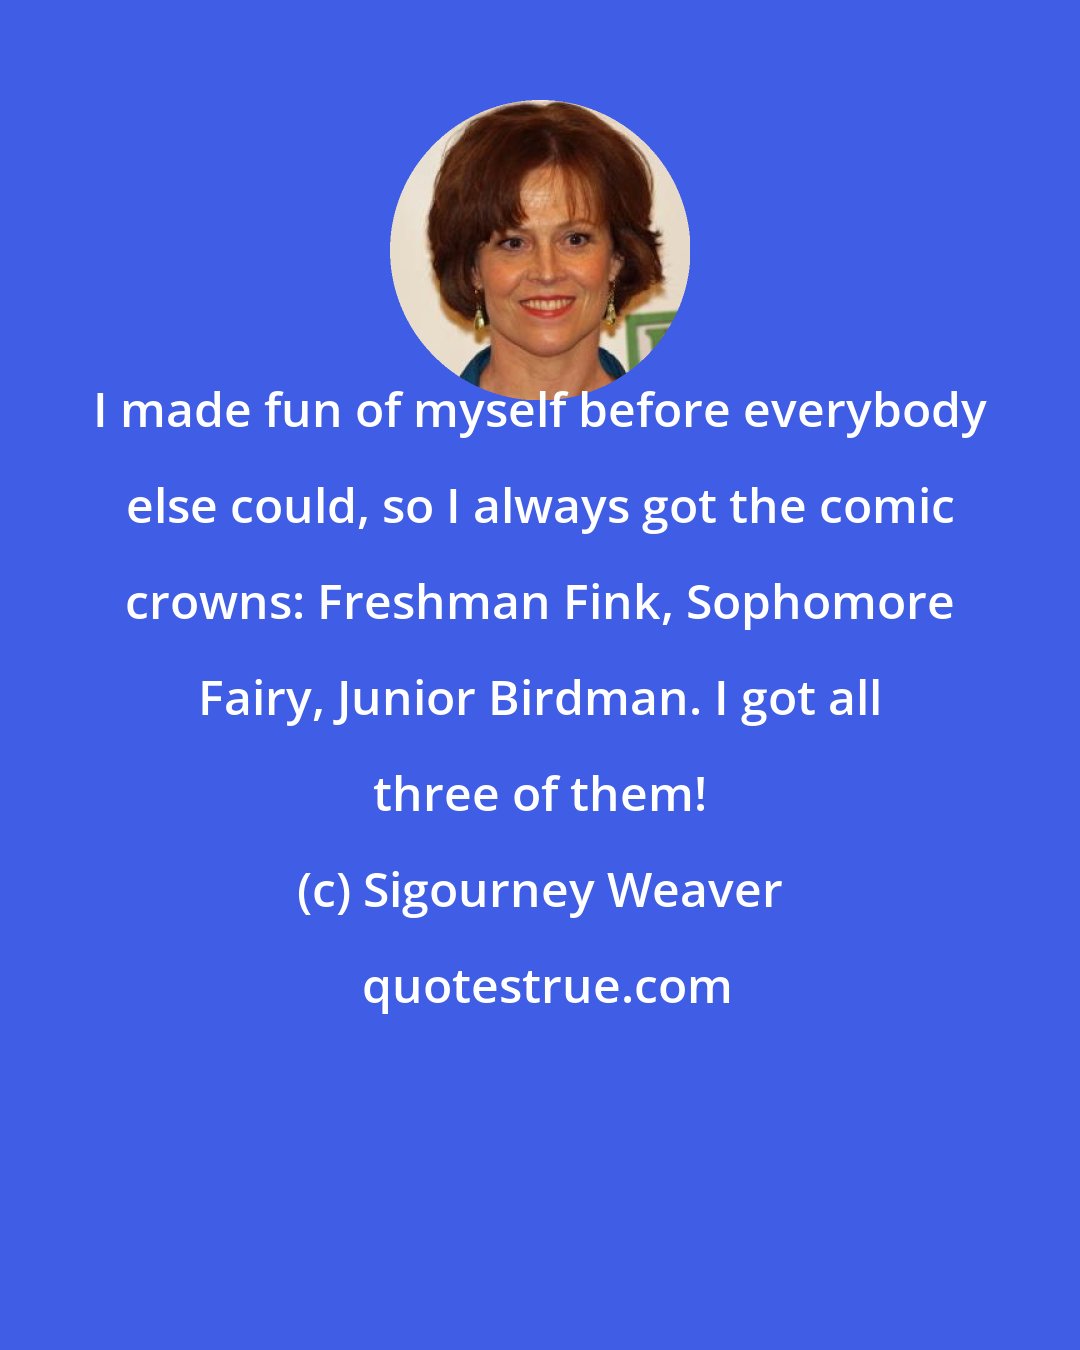 Sigourney Weaver: I made fun of myself before everybody else could, so I always got the comic crowns: Freshman Fink, Sophomore Fairy, Junior Birdman. I got all three of them!